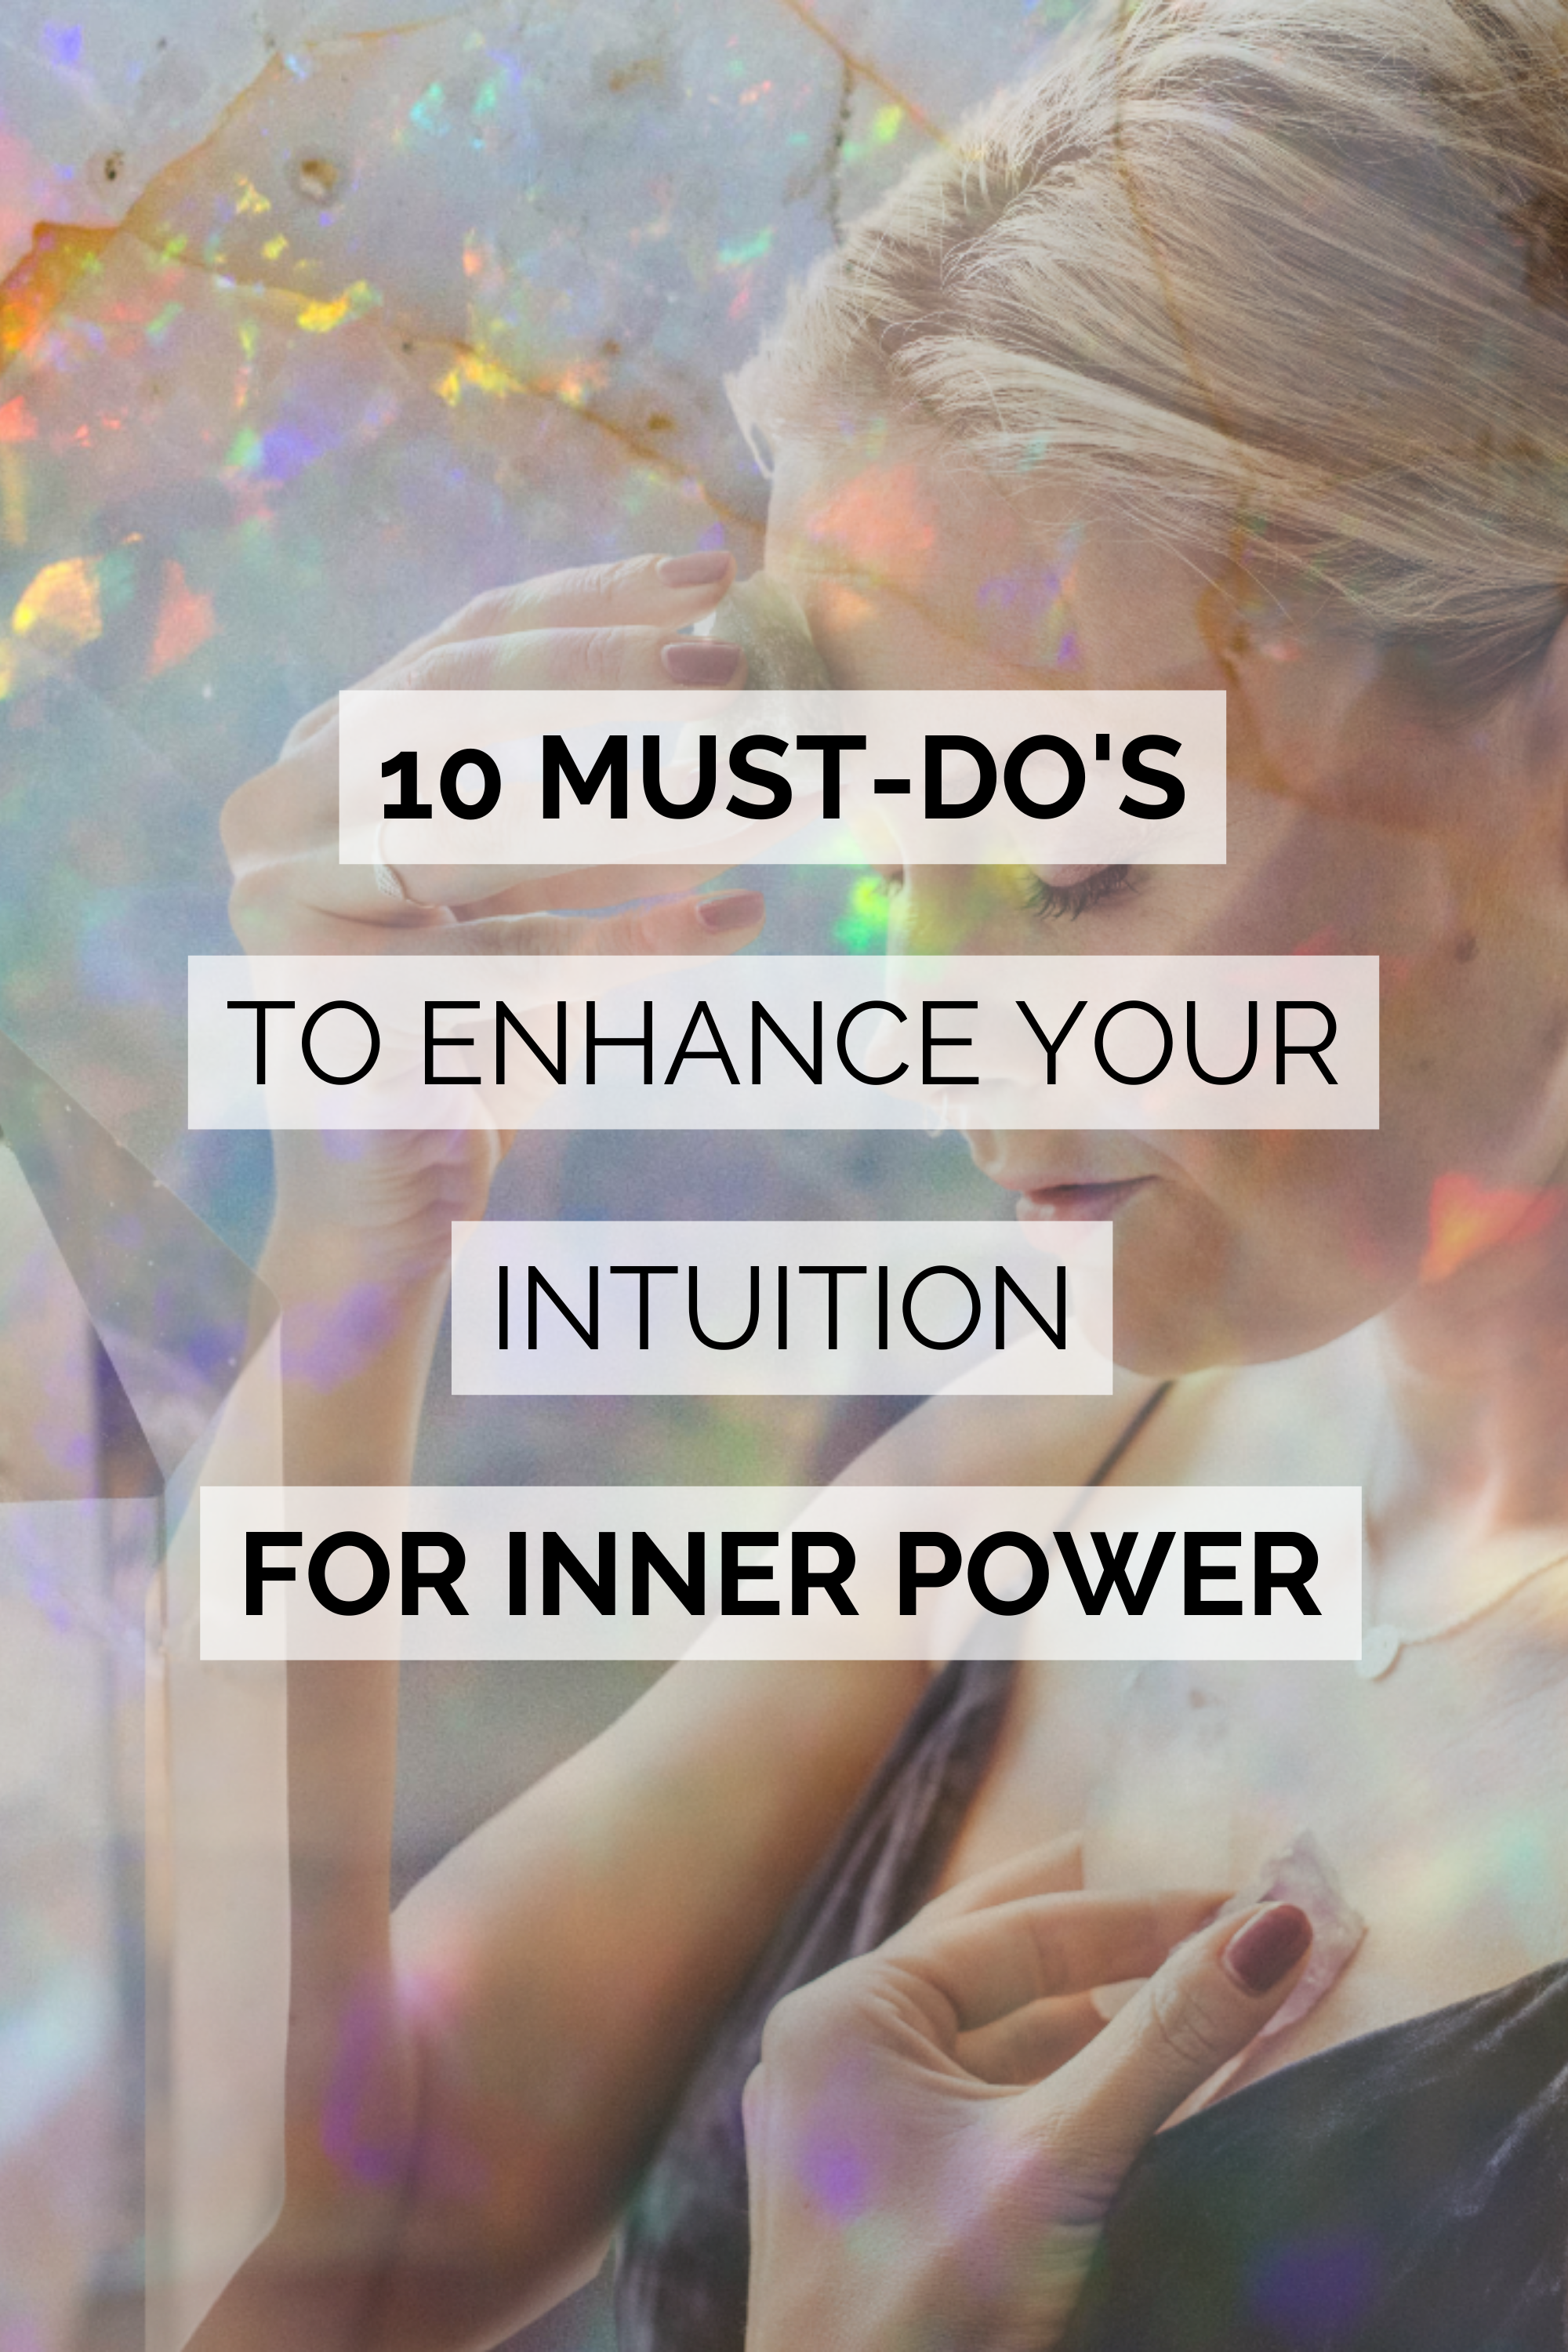 10 Must Do's to Enhance Your Intuition for Inner Power